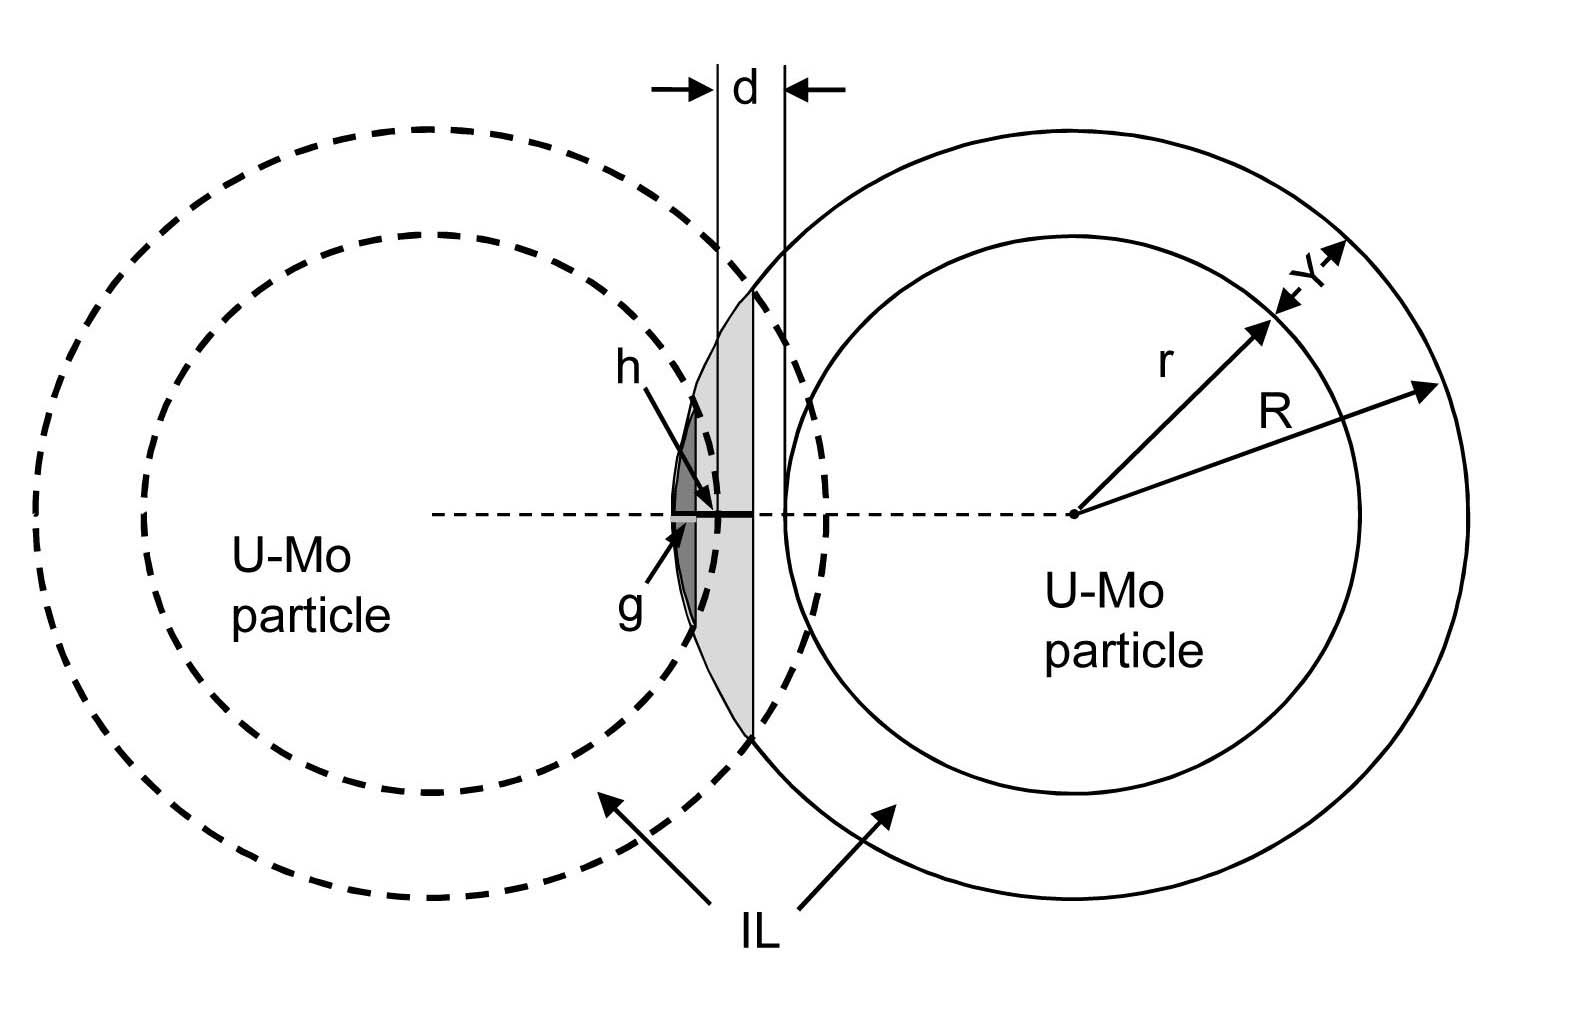 Schematic Showing Configuration of Two Neighboring
Particles with IL Formed on the Surfaces and IL Overlapping.